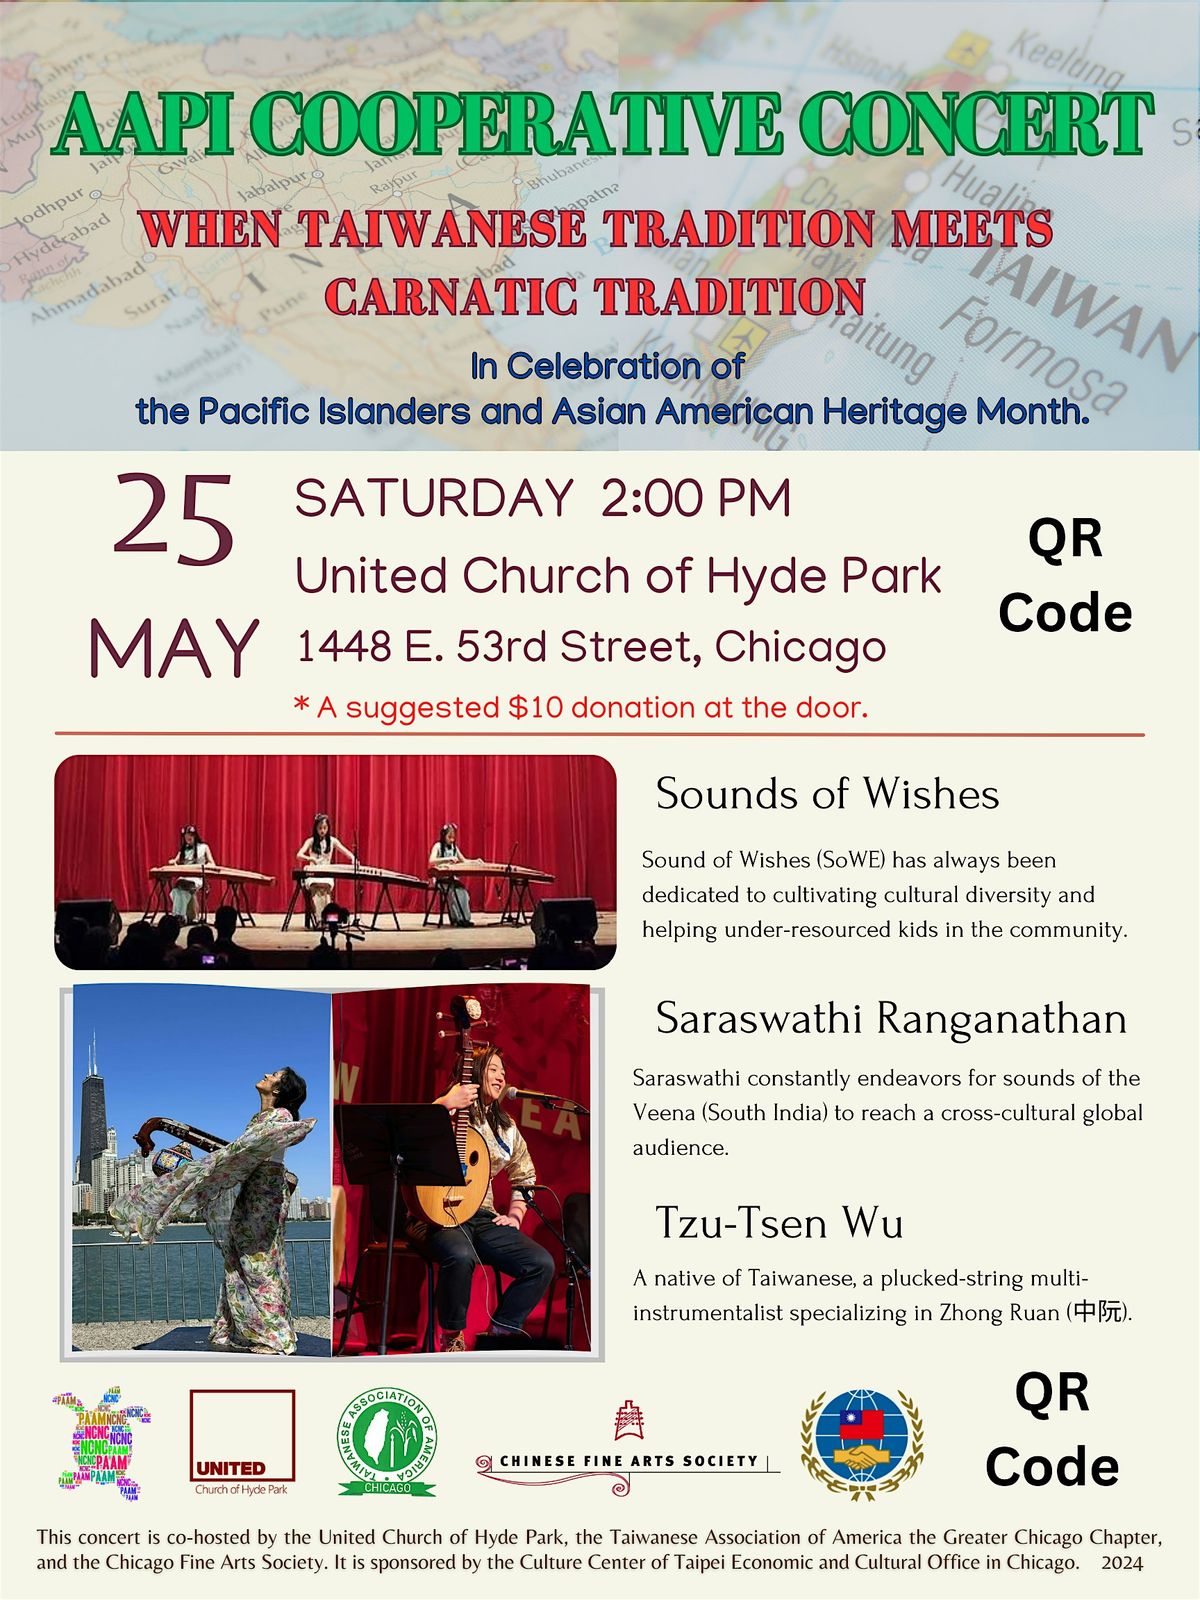 AAPI Cooperative Concert: When Taiwanese Tradition meets Carnatic Tradition